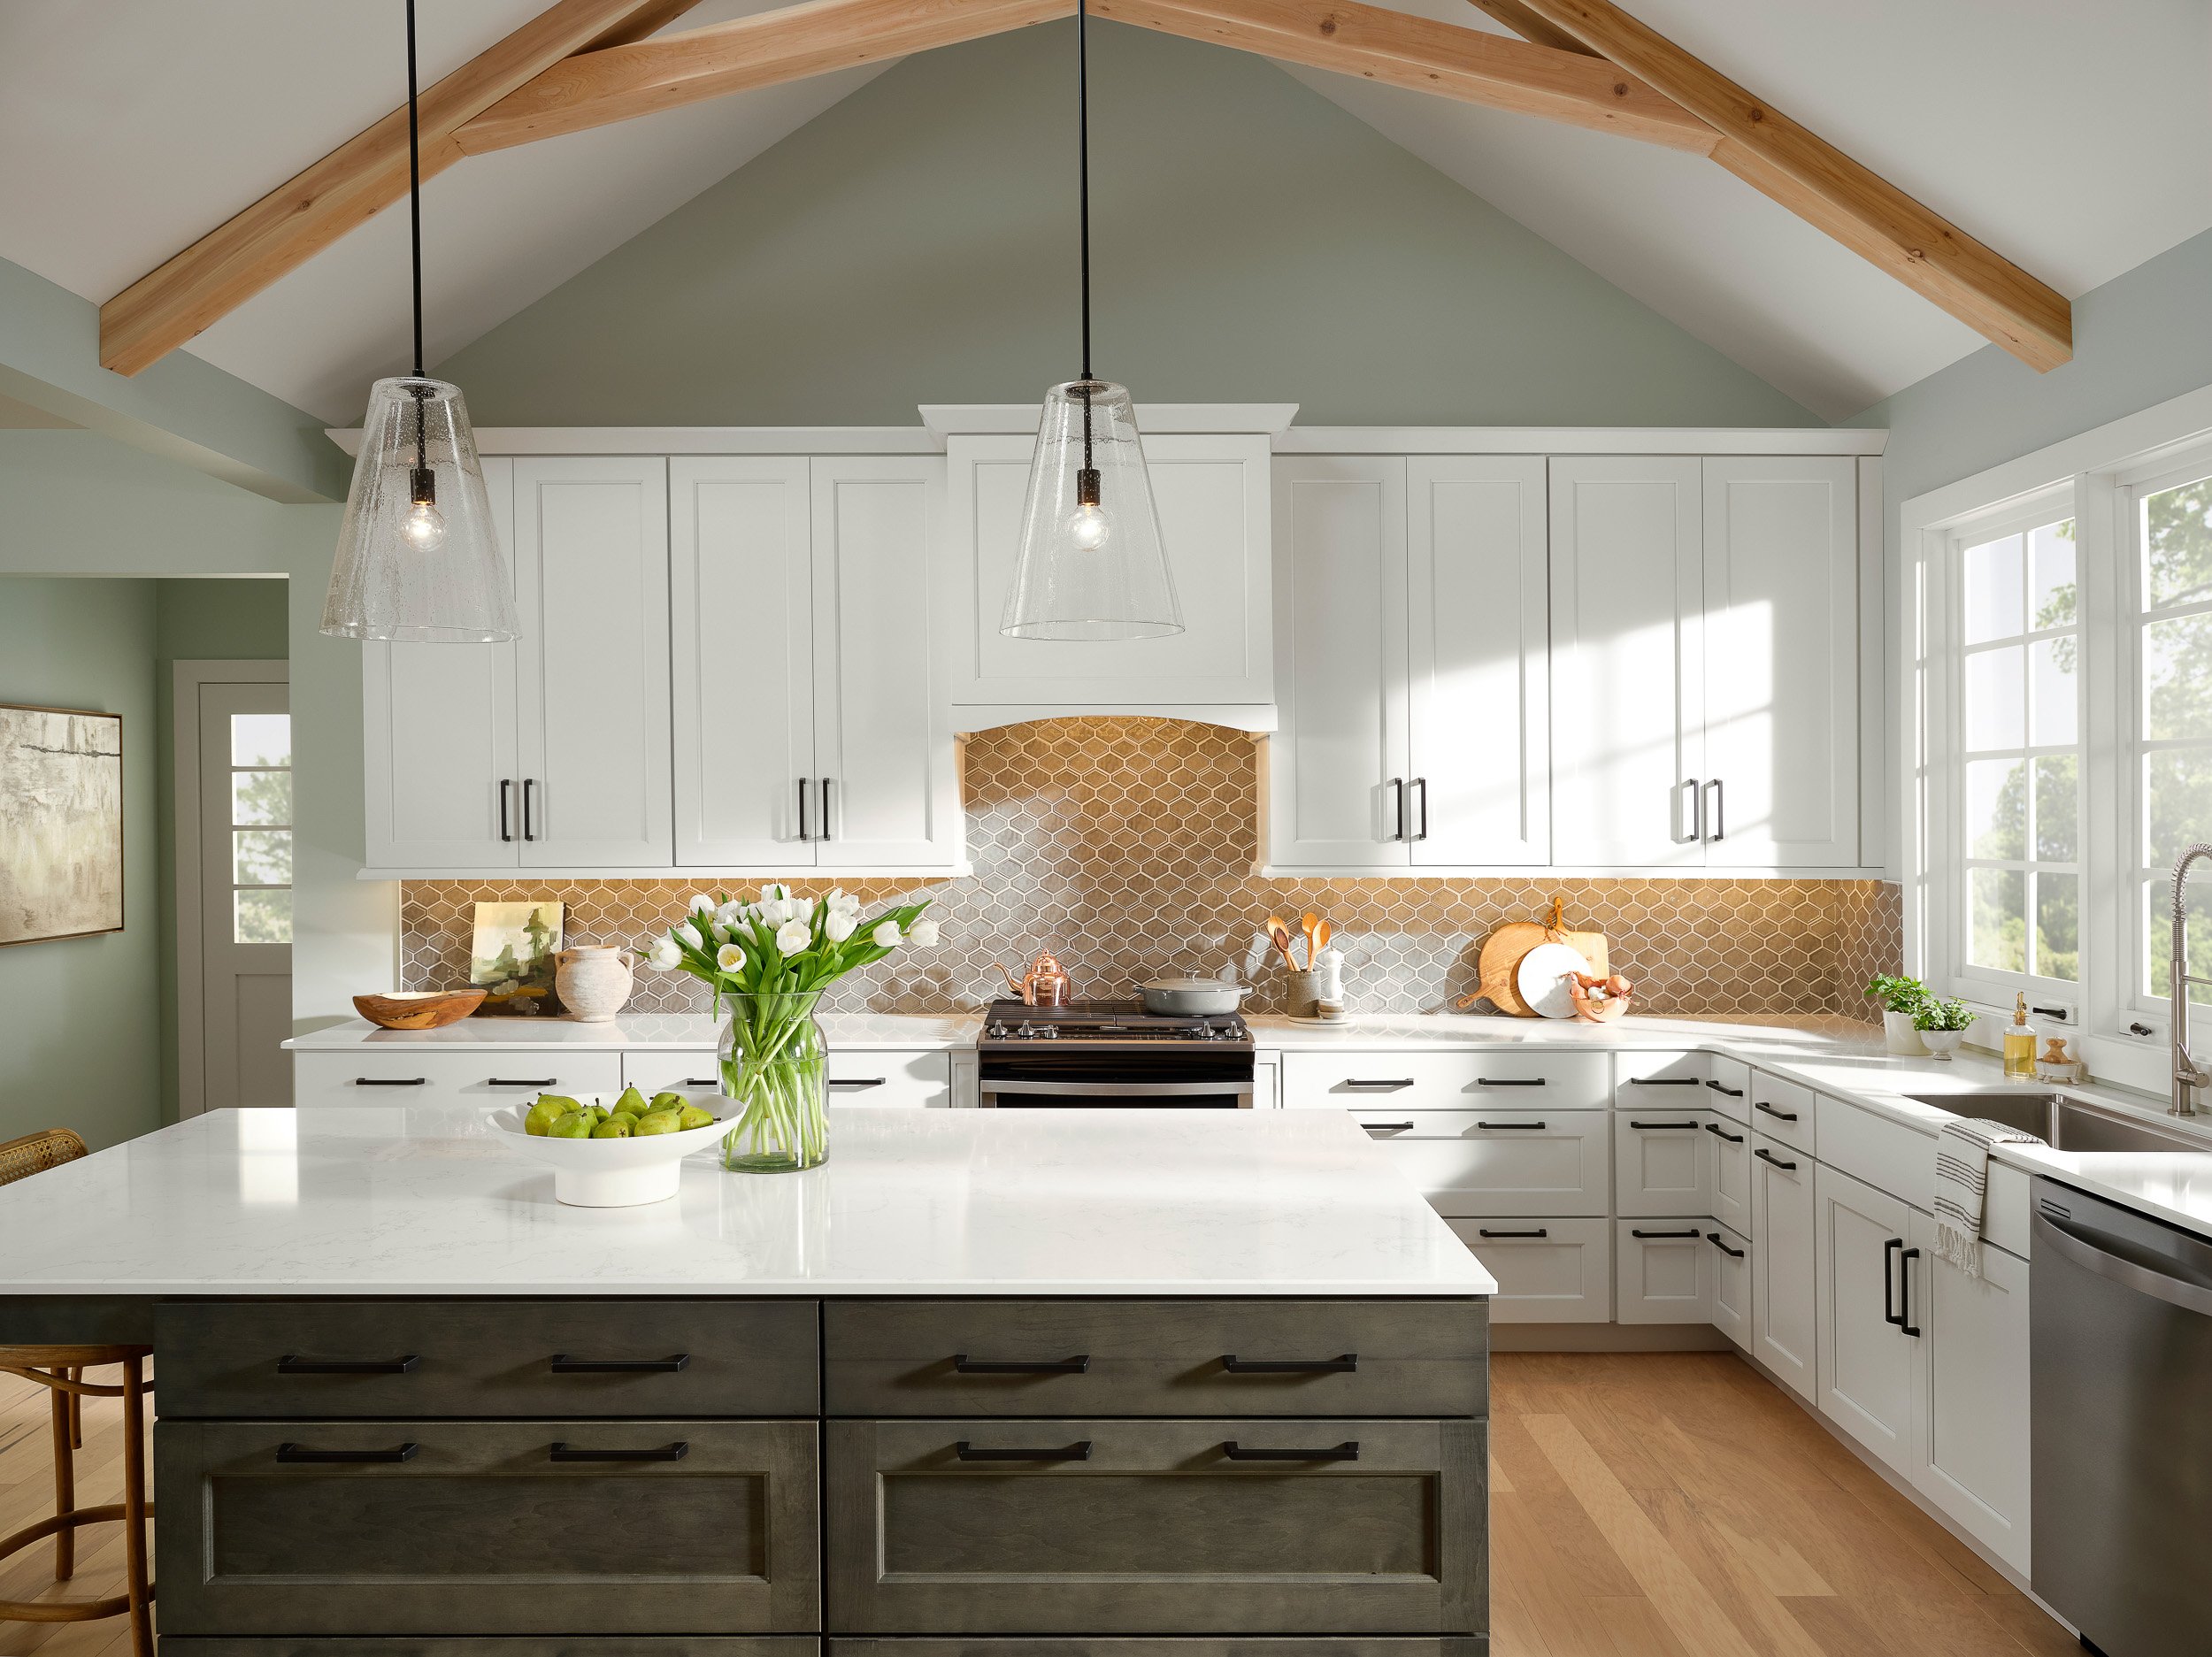 Large bright white kitchen with pendant lighting